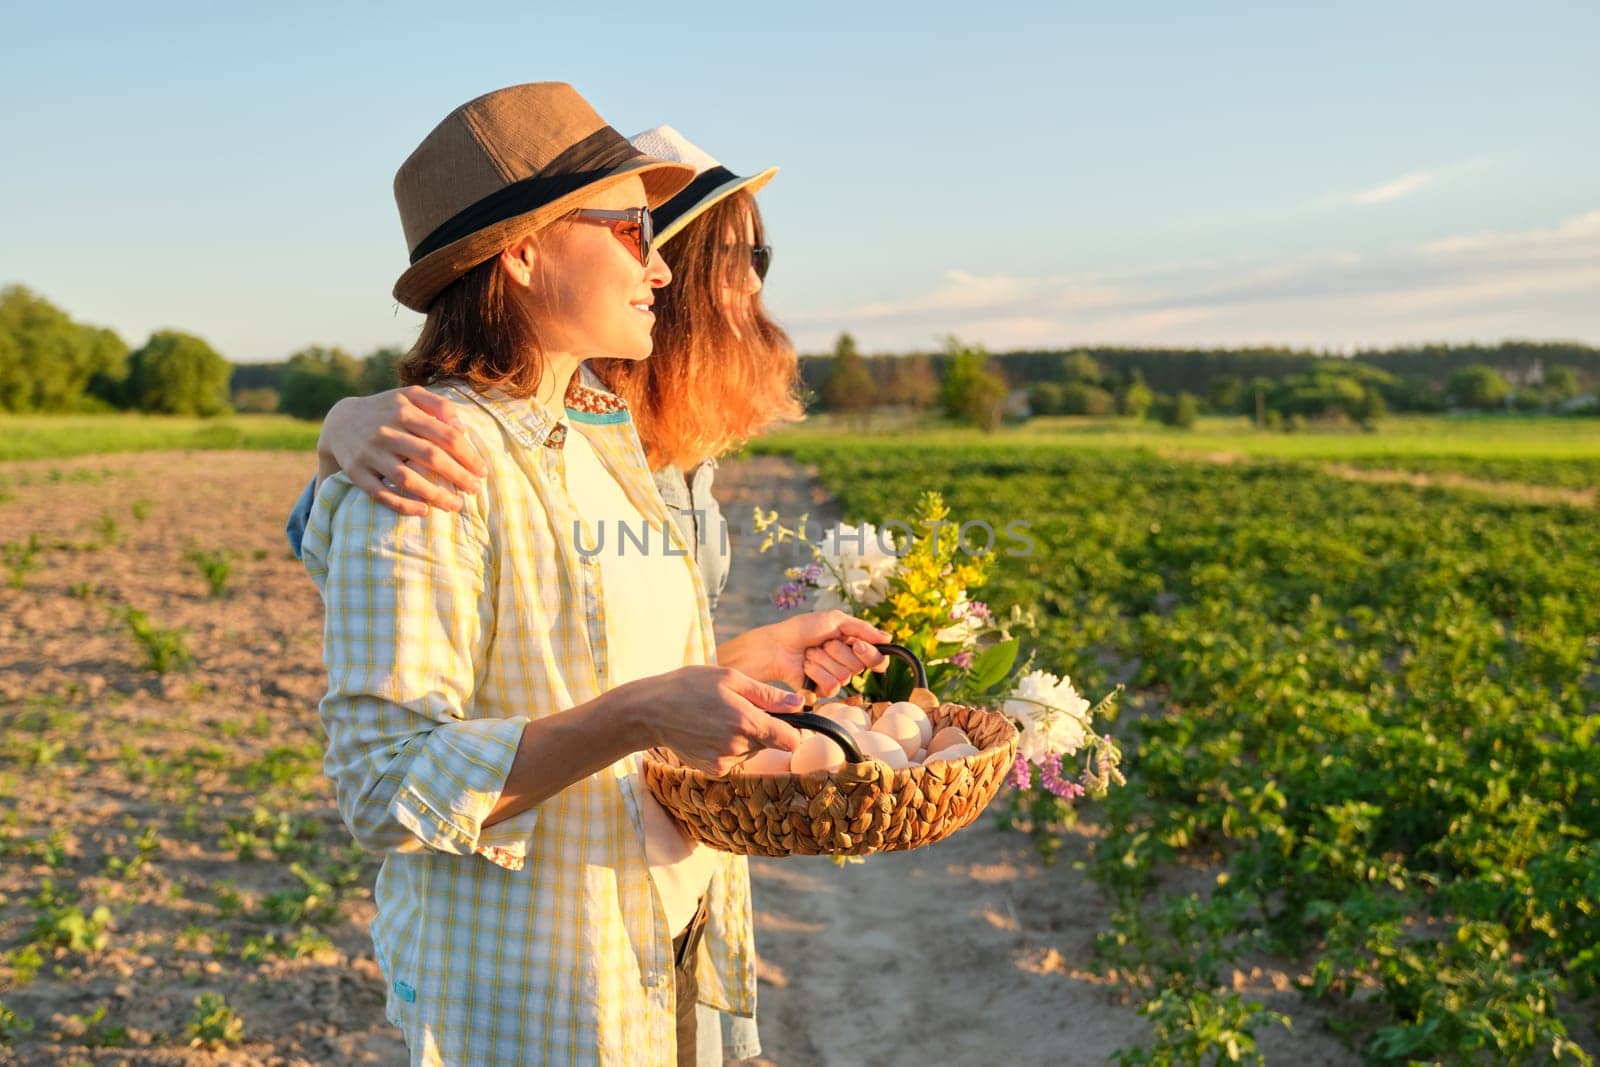 Portrait of two happy smiling embraced women mother and teenage daughter with basket of farm eggs in hats, with bouquet of flowers in garden, summer nature, sunset background, copy space